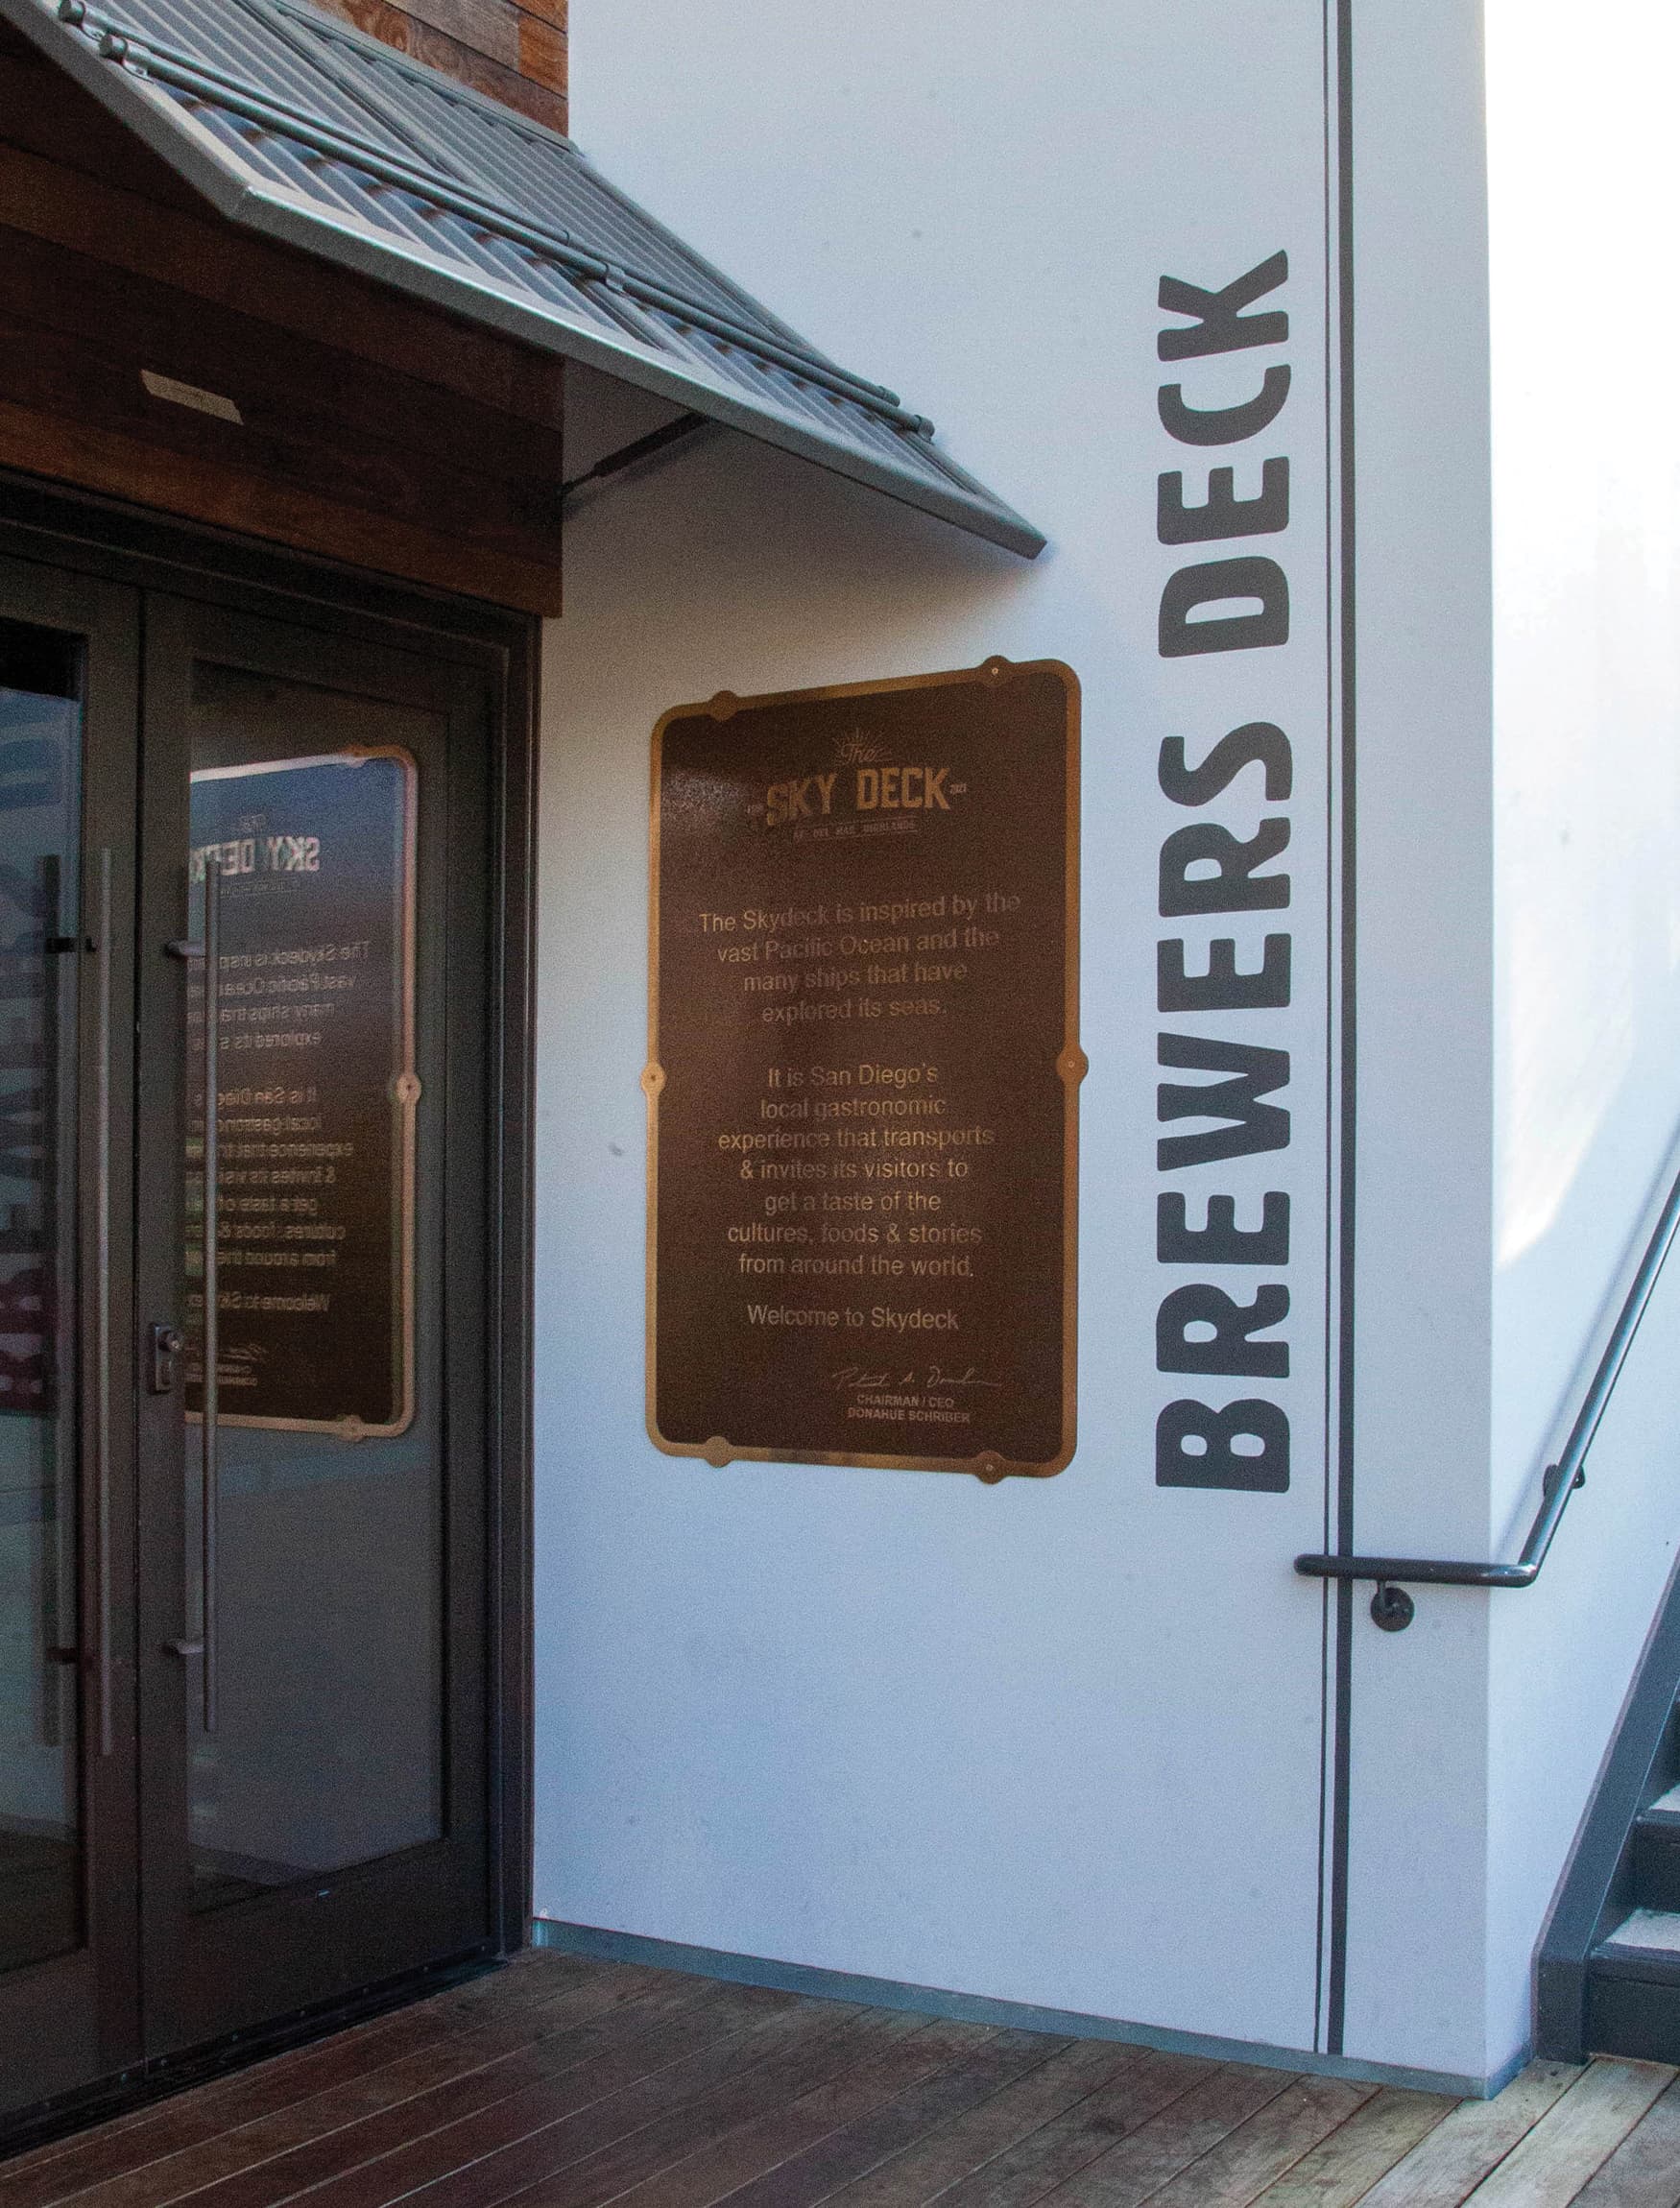 Mounted educational plaque sign and vertical painted tenant identity wall signage for The Skydeck, a retail food and beverage hall, located in Del Mar, California.